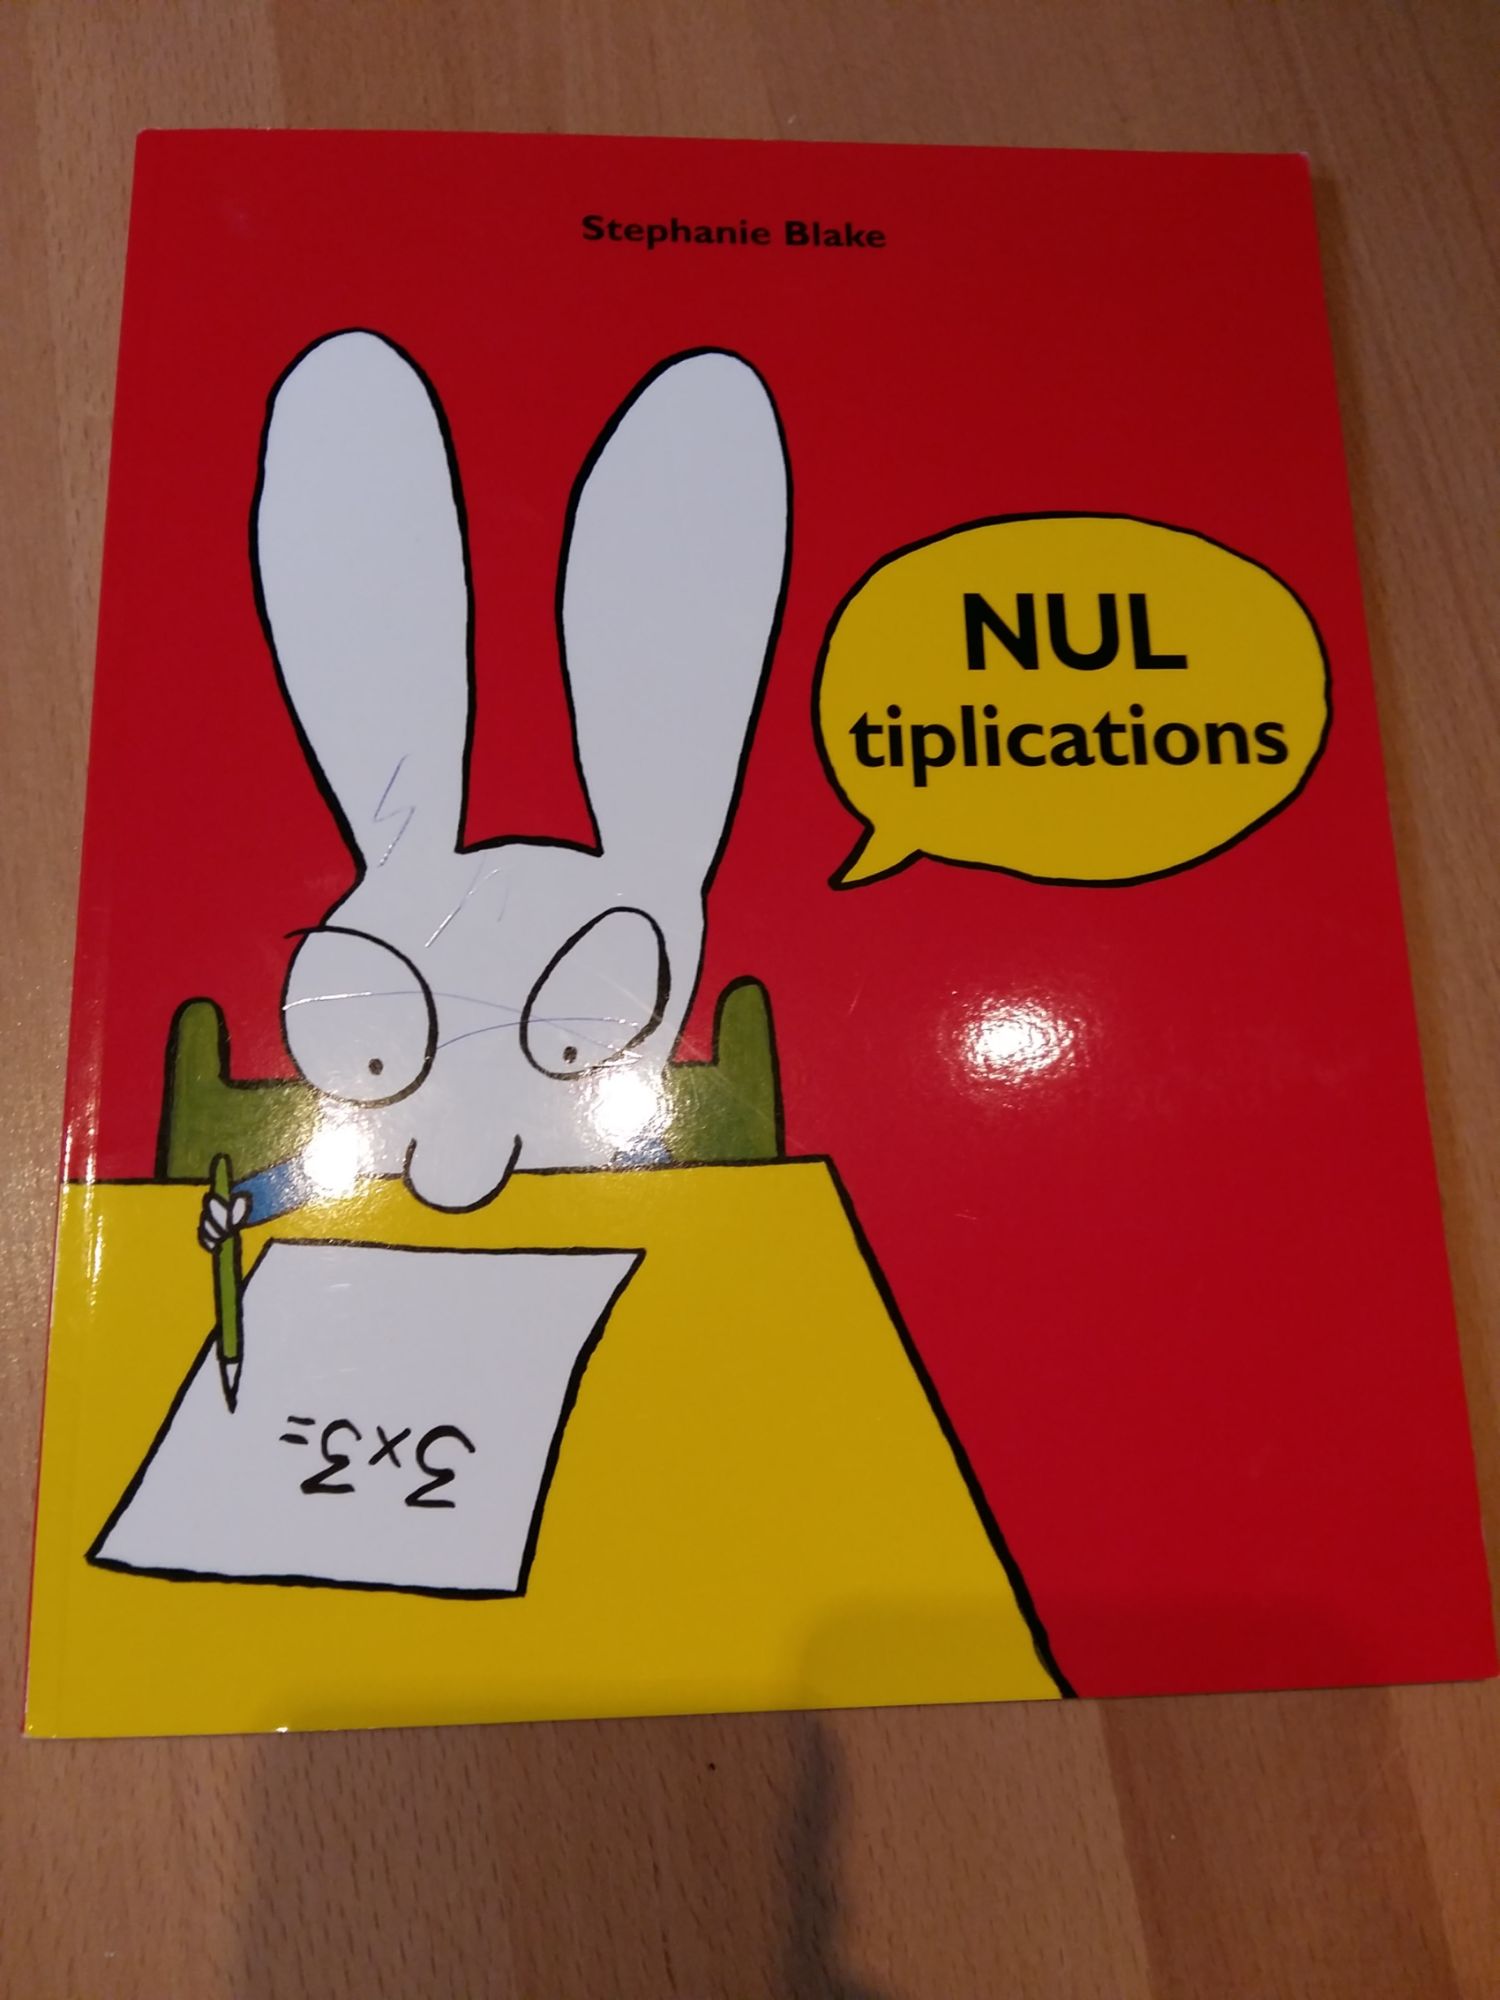 Nul tiplications